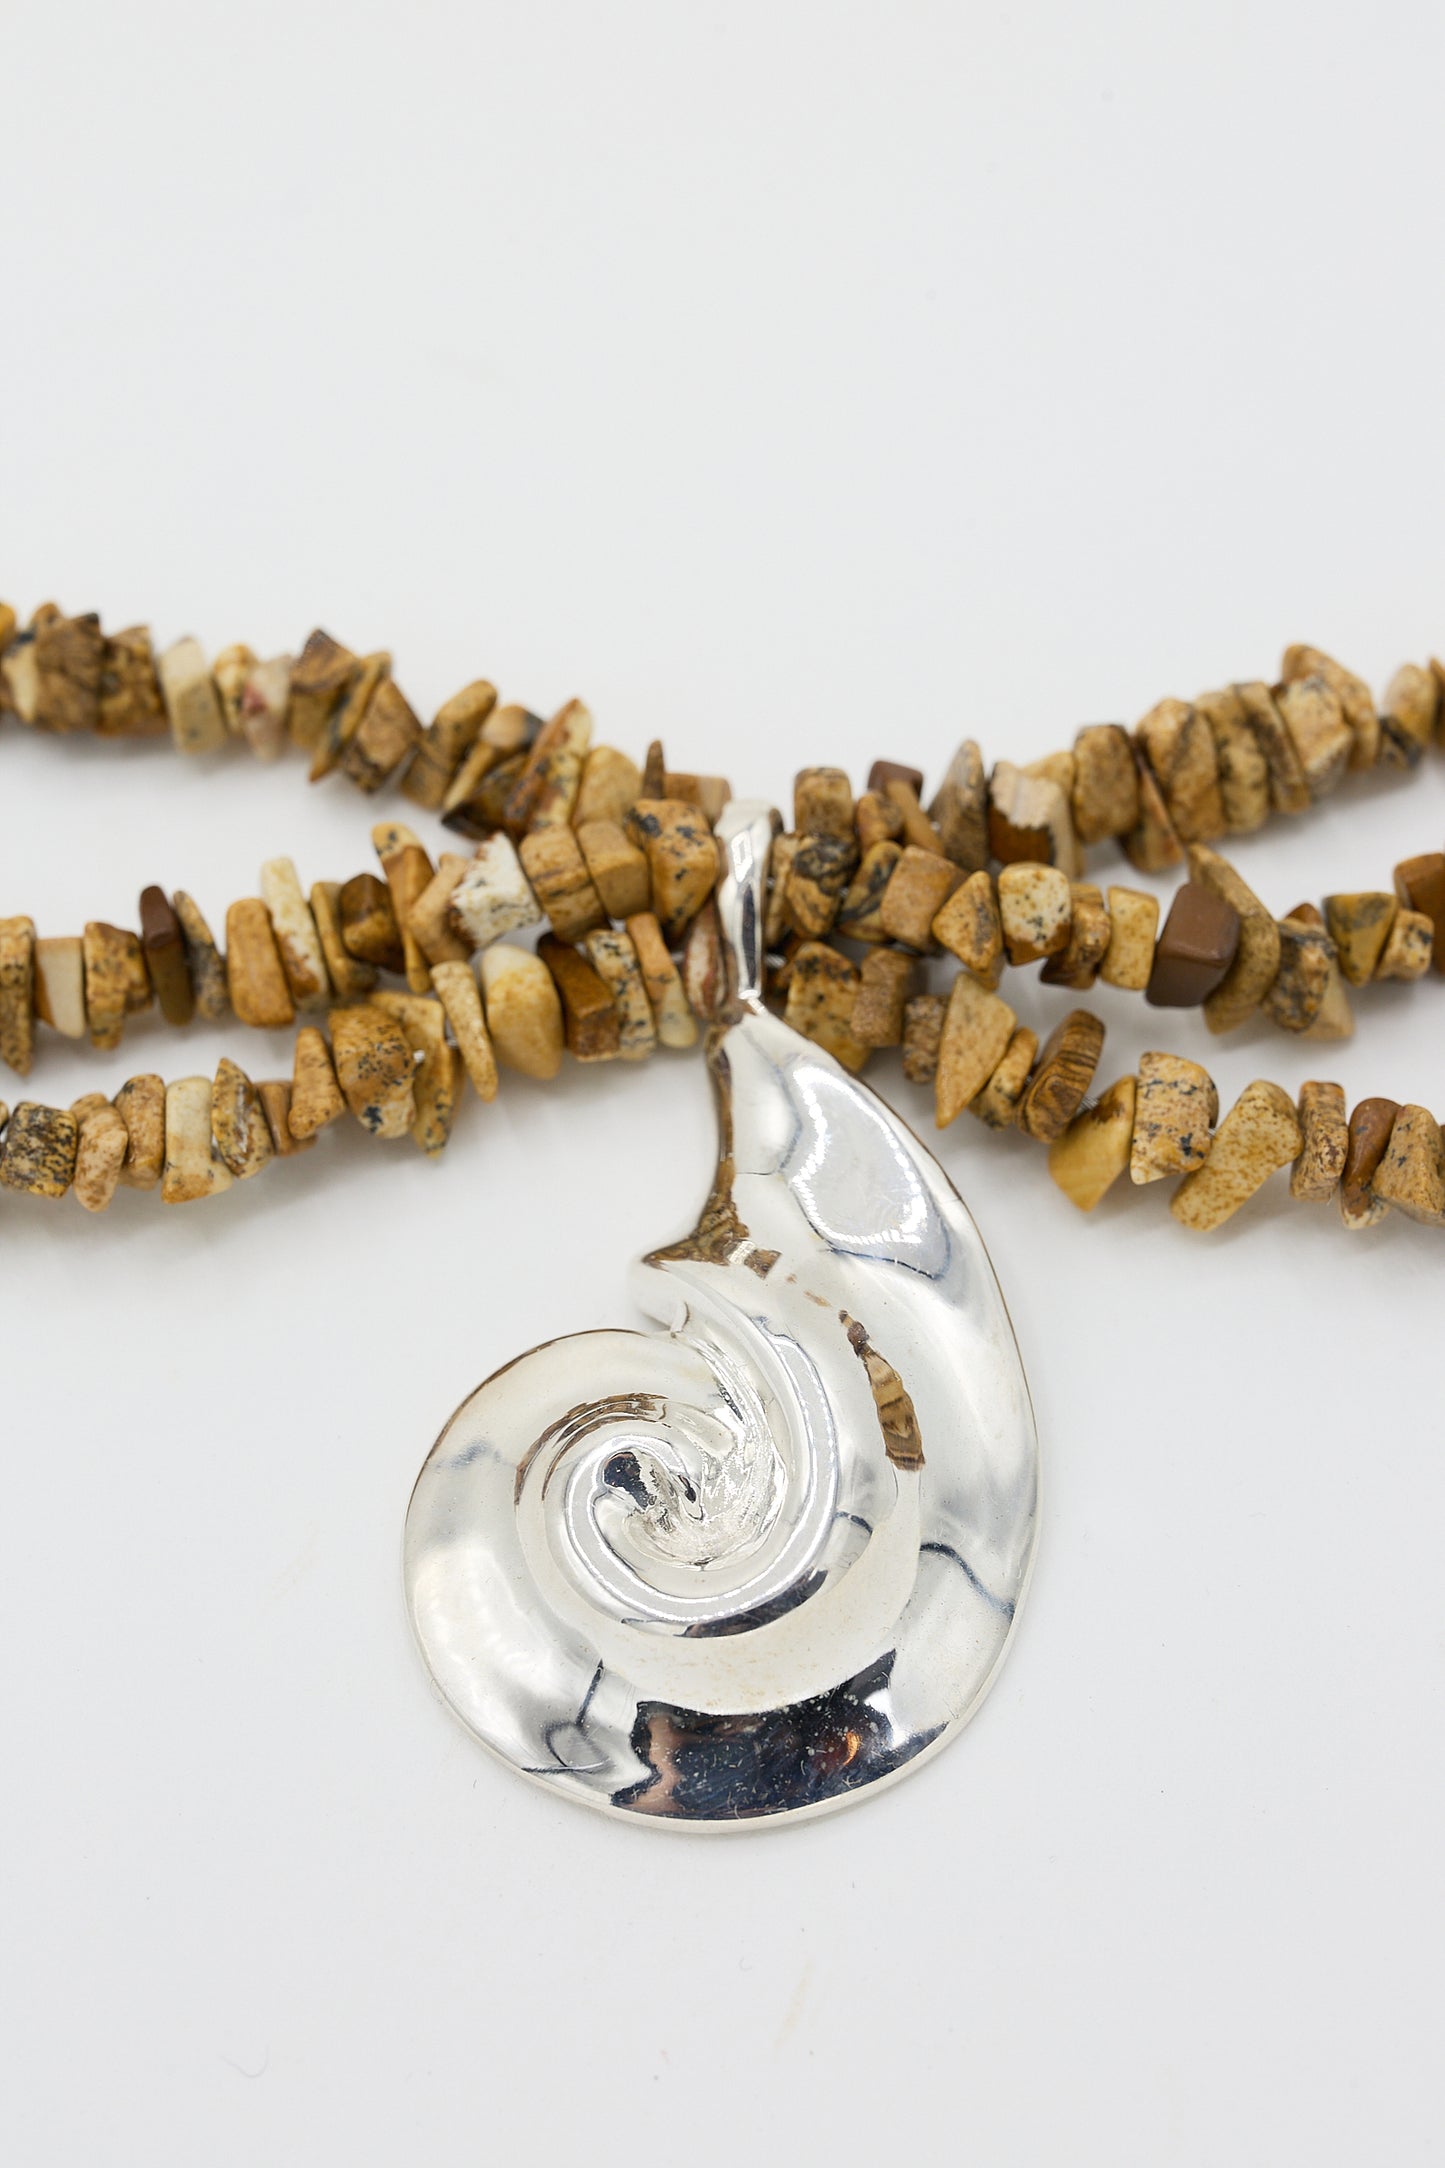 A Cata bracelet in Sand Jasper by Santangelo with a sterling silver pendant and beads made from small pieces of wood on a white background.